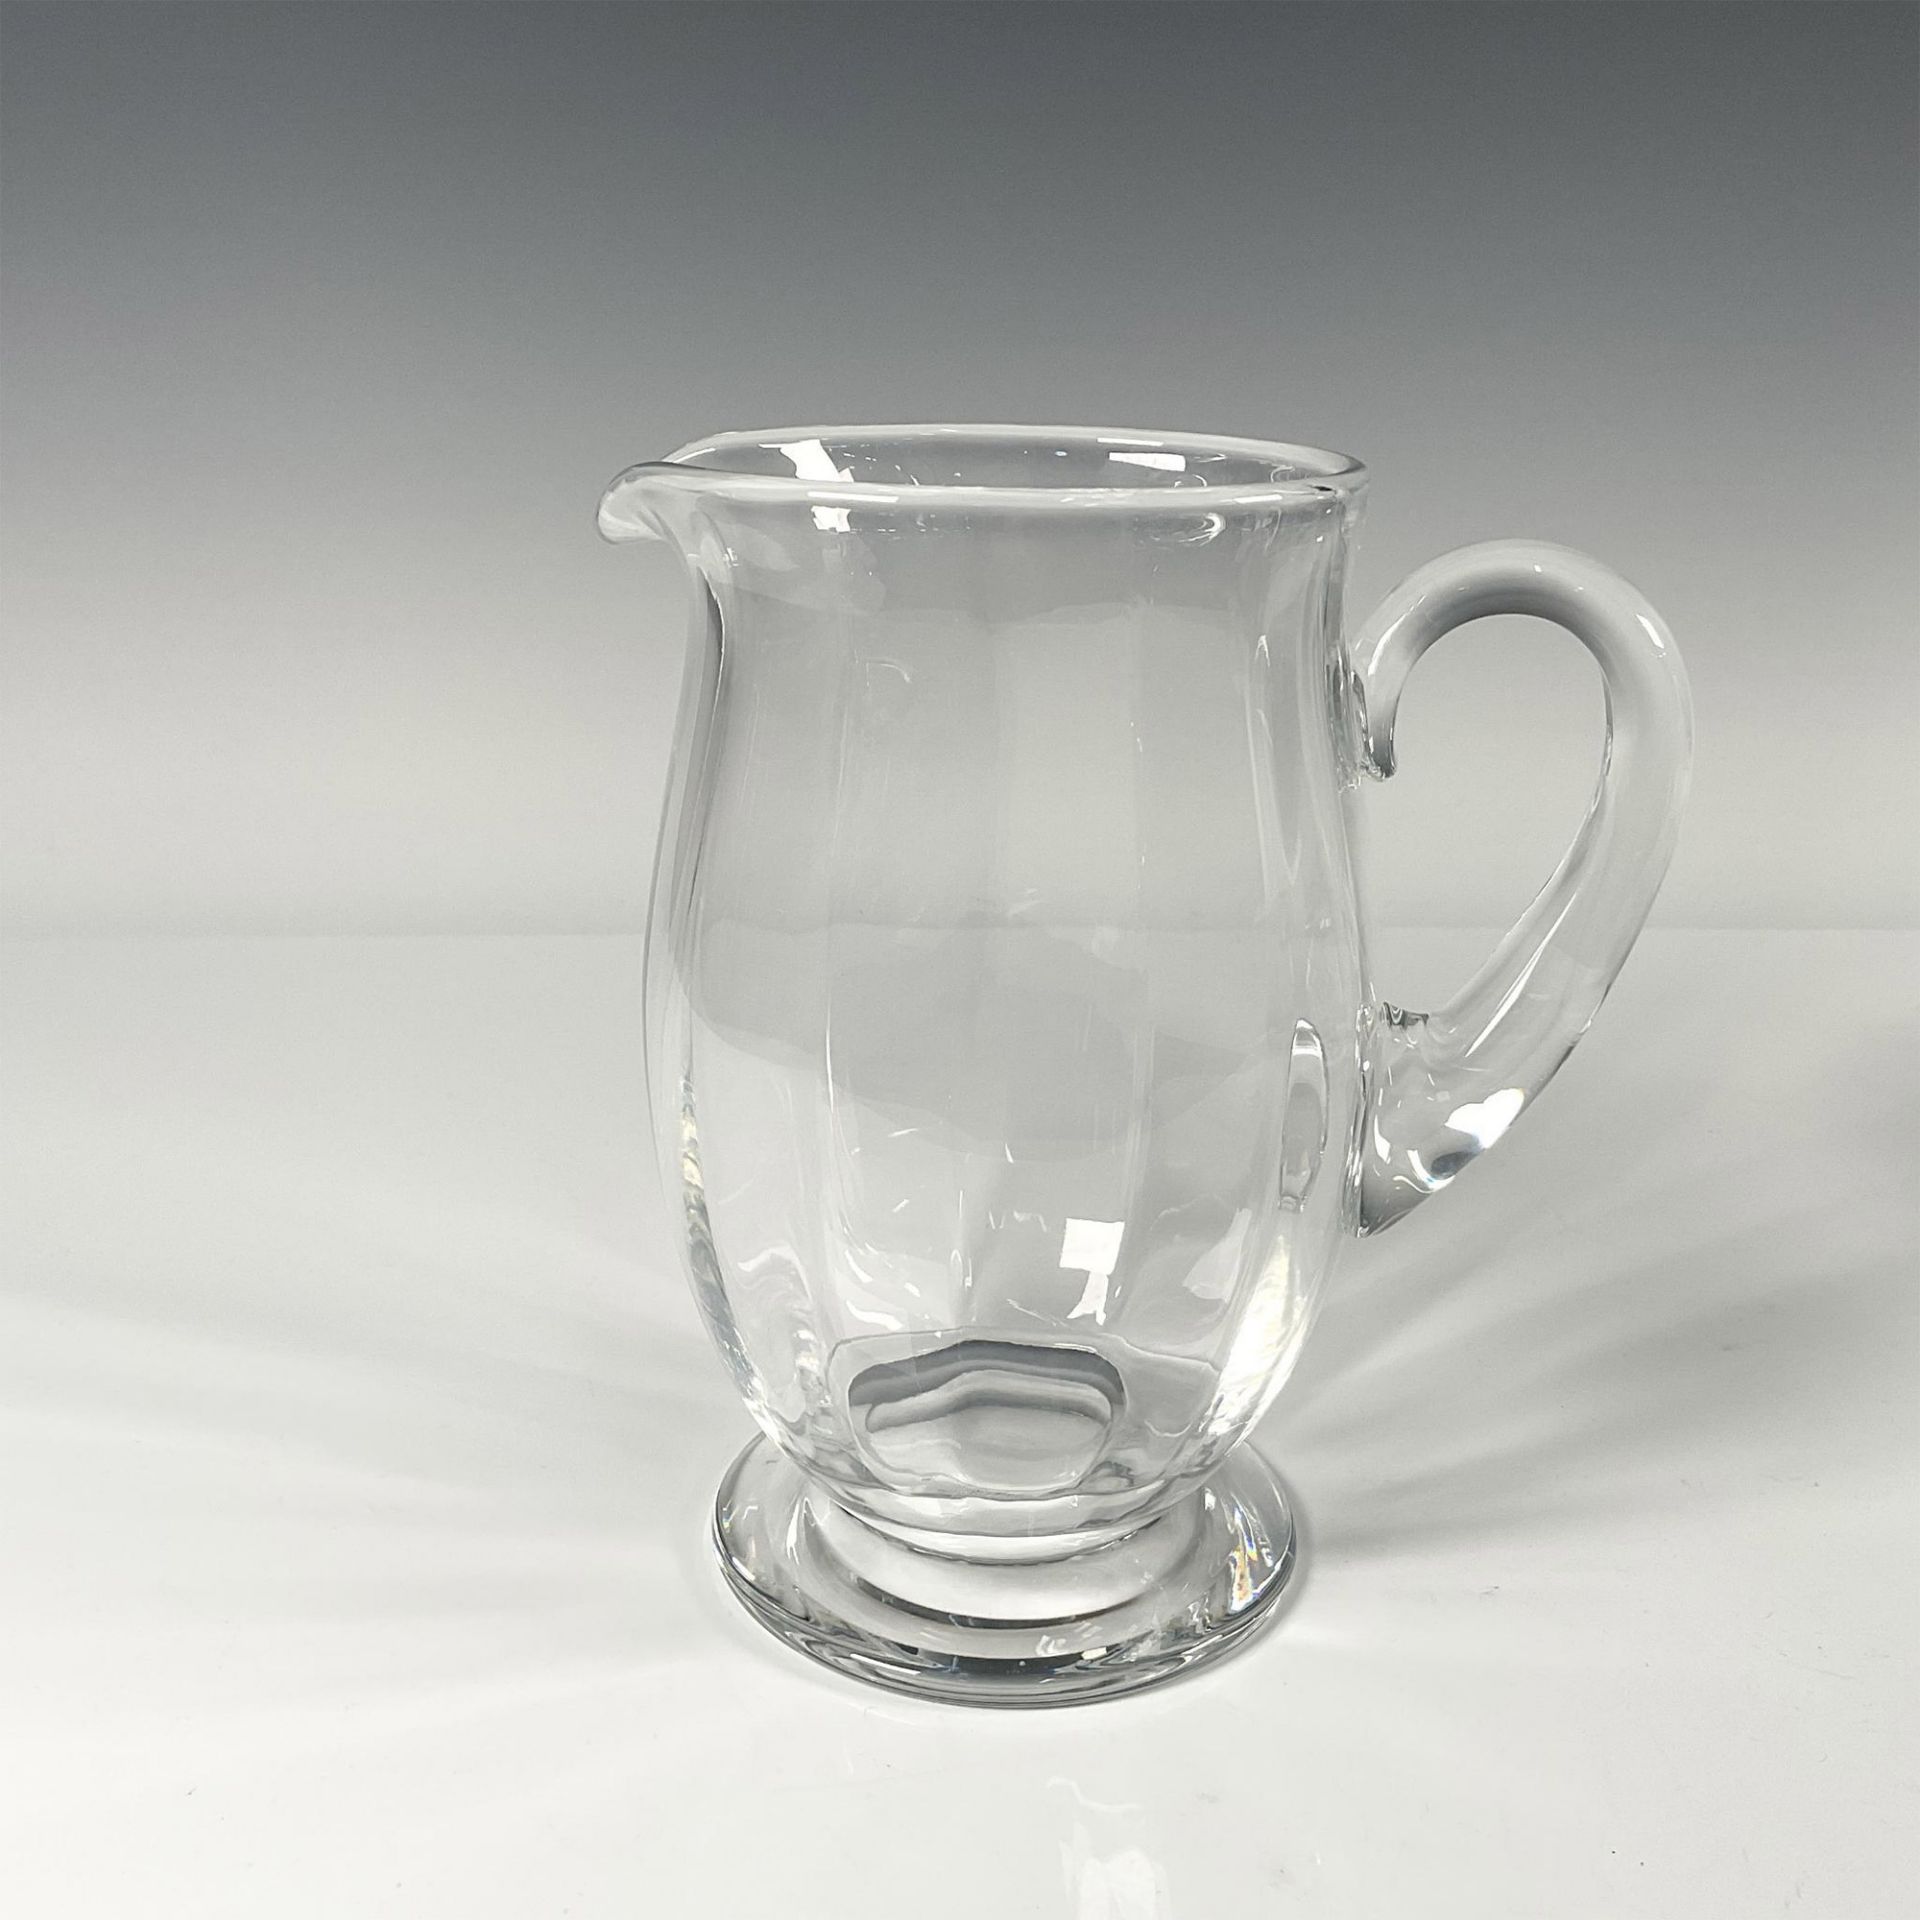 Baccarat Crystal Pitcher - Image 2 of 4